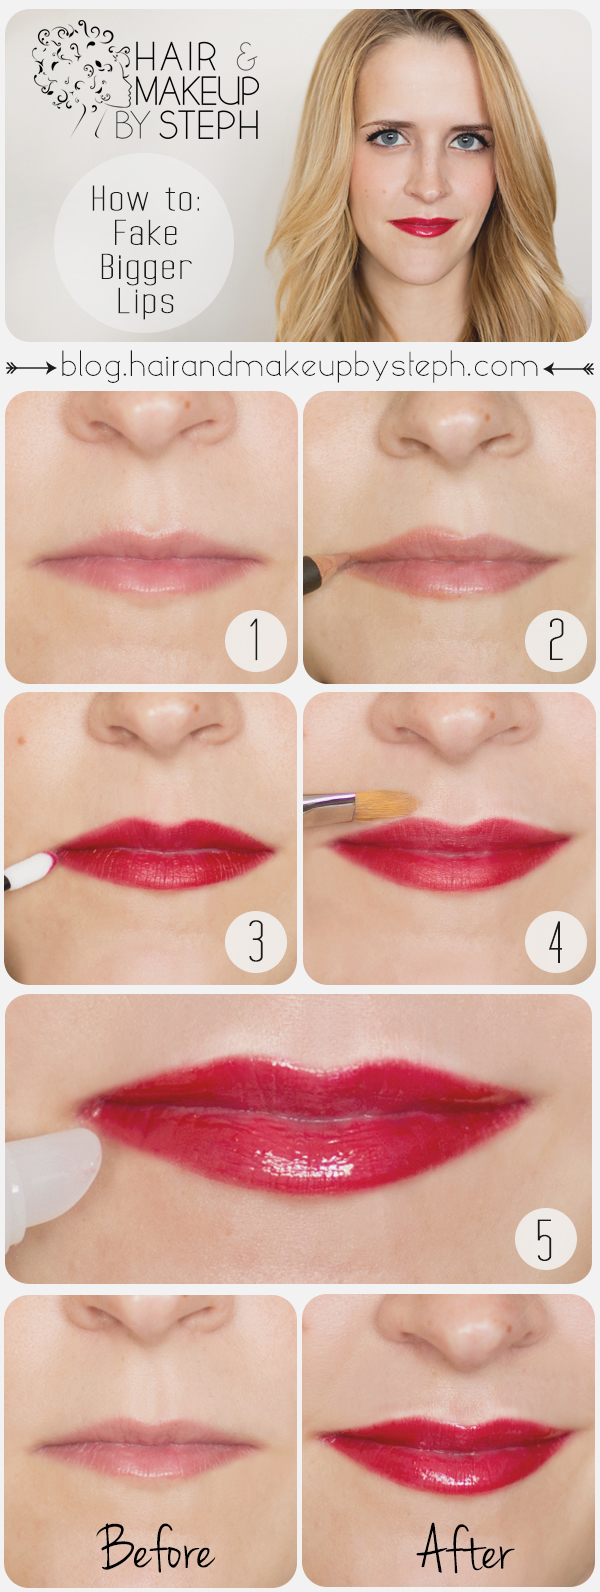 16 Makeup Tricks For Flawless Look Every Woman Should Know (9)